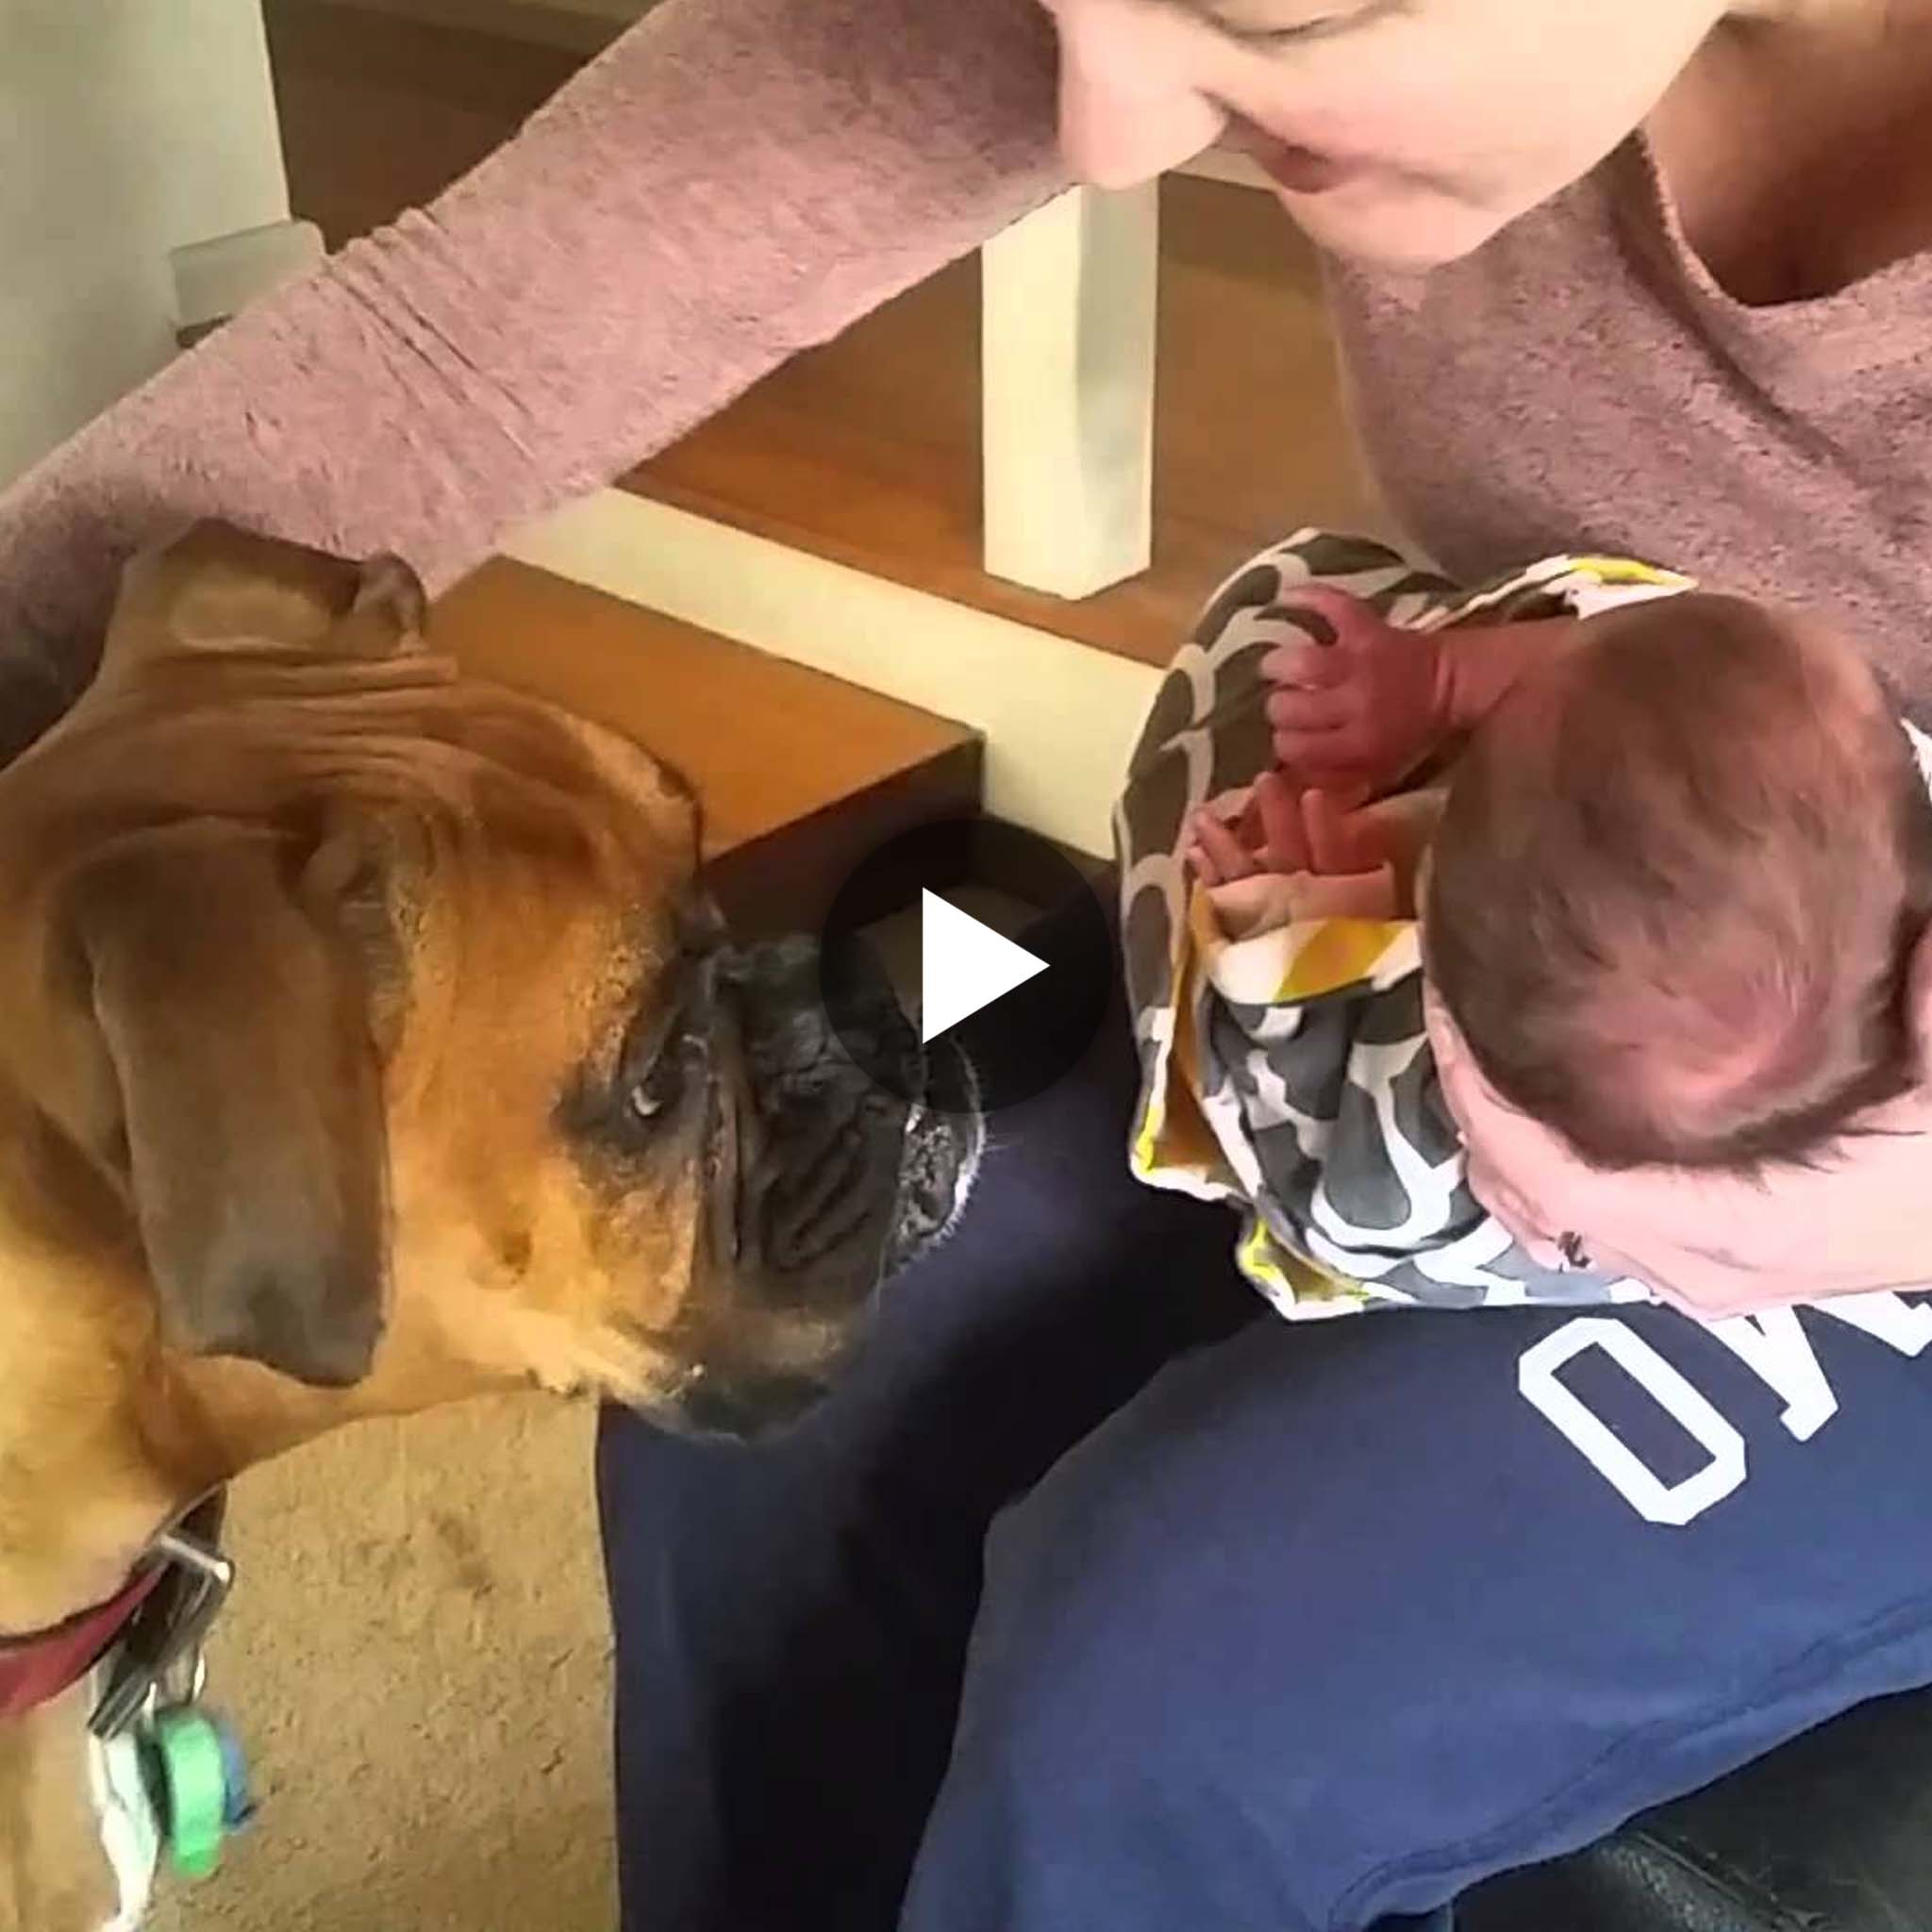 Witness the moment the boxer dog meets his newborn owner, full of curiosity and excitement, hoping that the two will have a good relationship with each other in the future.